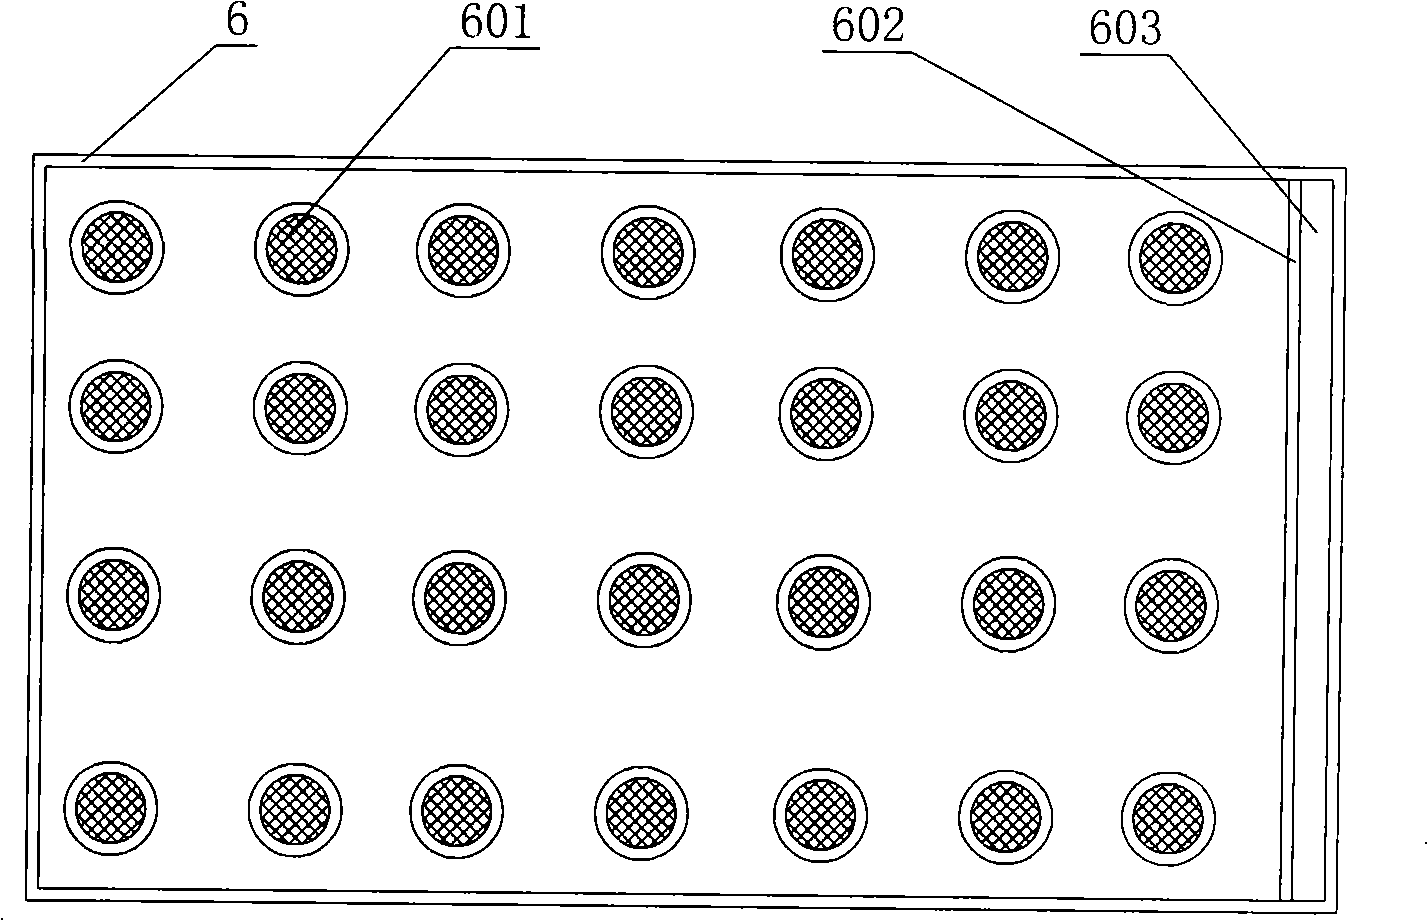 Bioreactor for producing tissue engineering products